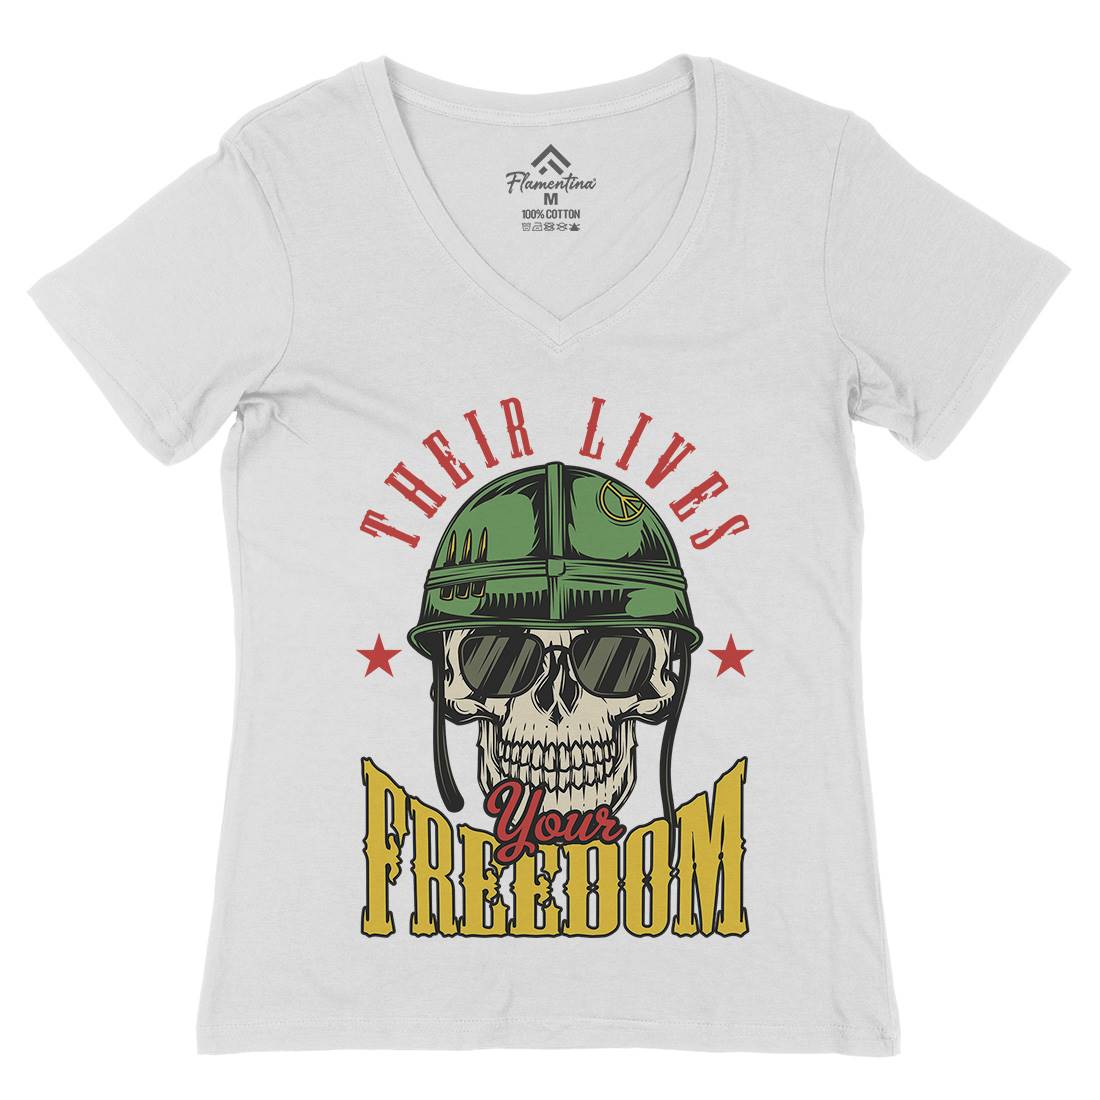 Your Freedom Womens Organic V-Neck T-Shirt Army C899